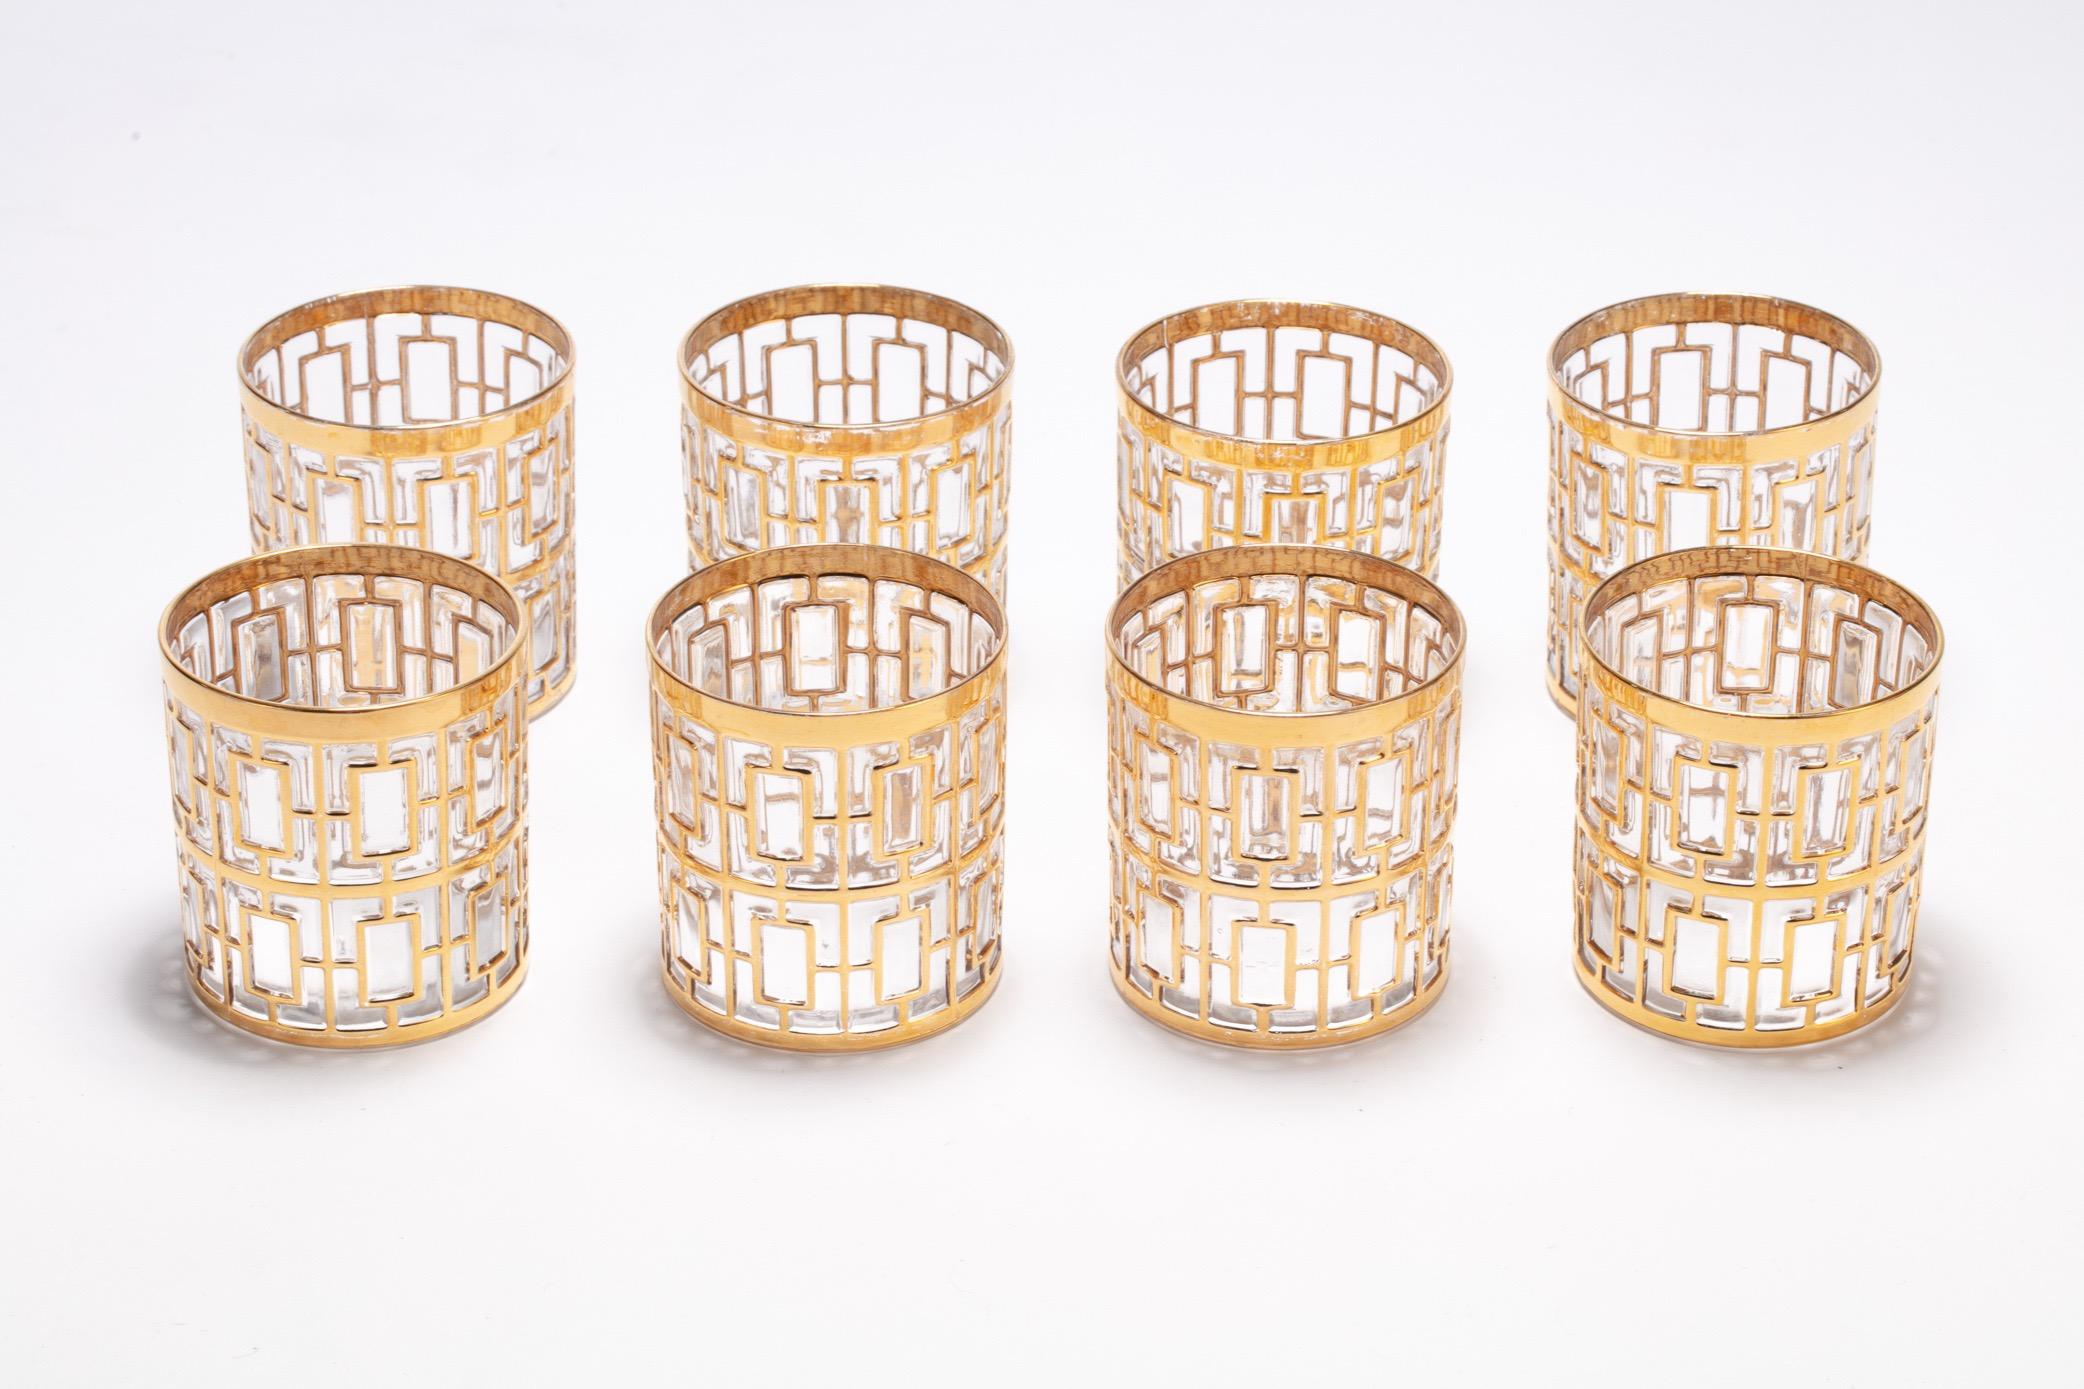 If you're looking for the best in sexy, Mid Century Modern style glasses, you've found them. These vintage rocks glasses were manufactured by the Imperial Glass Company in Ohio sometime between 1965 and 1979 and feature the iconic trellis pattern -